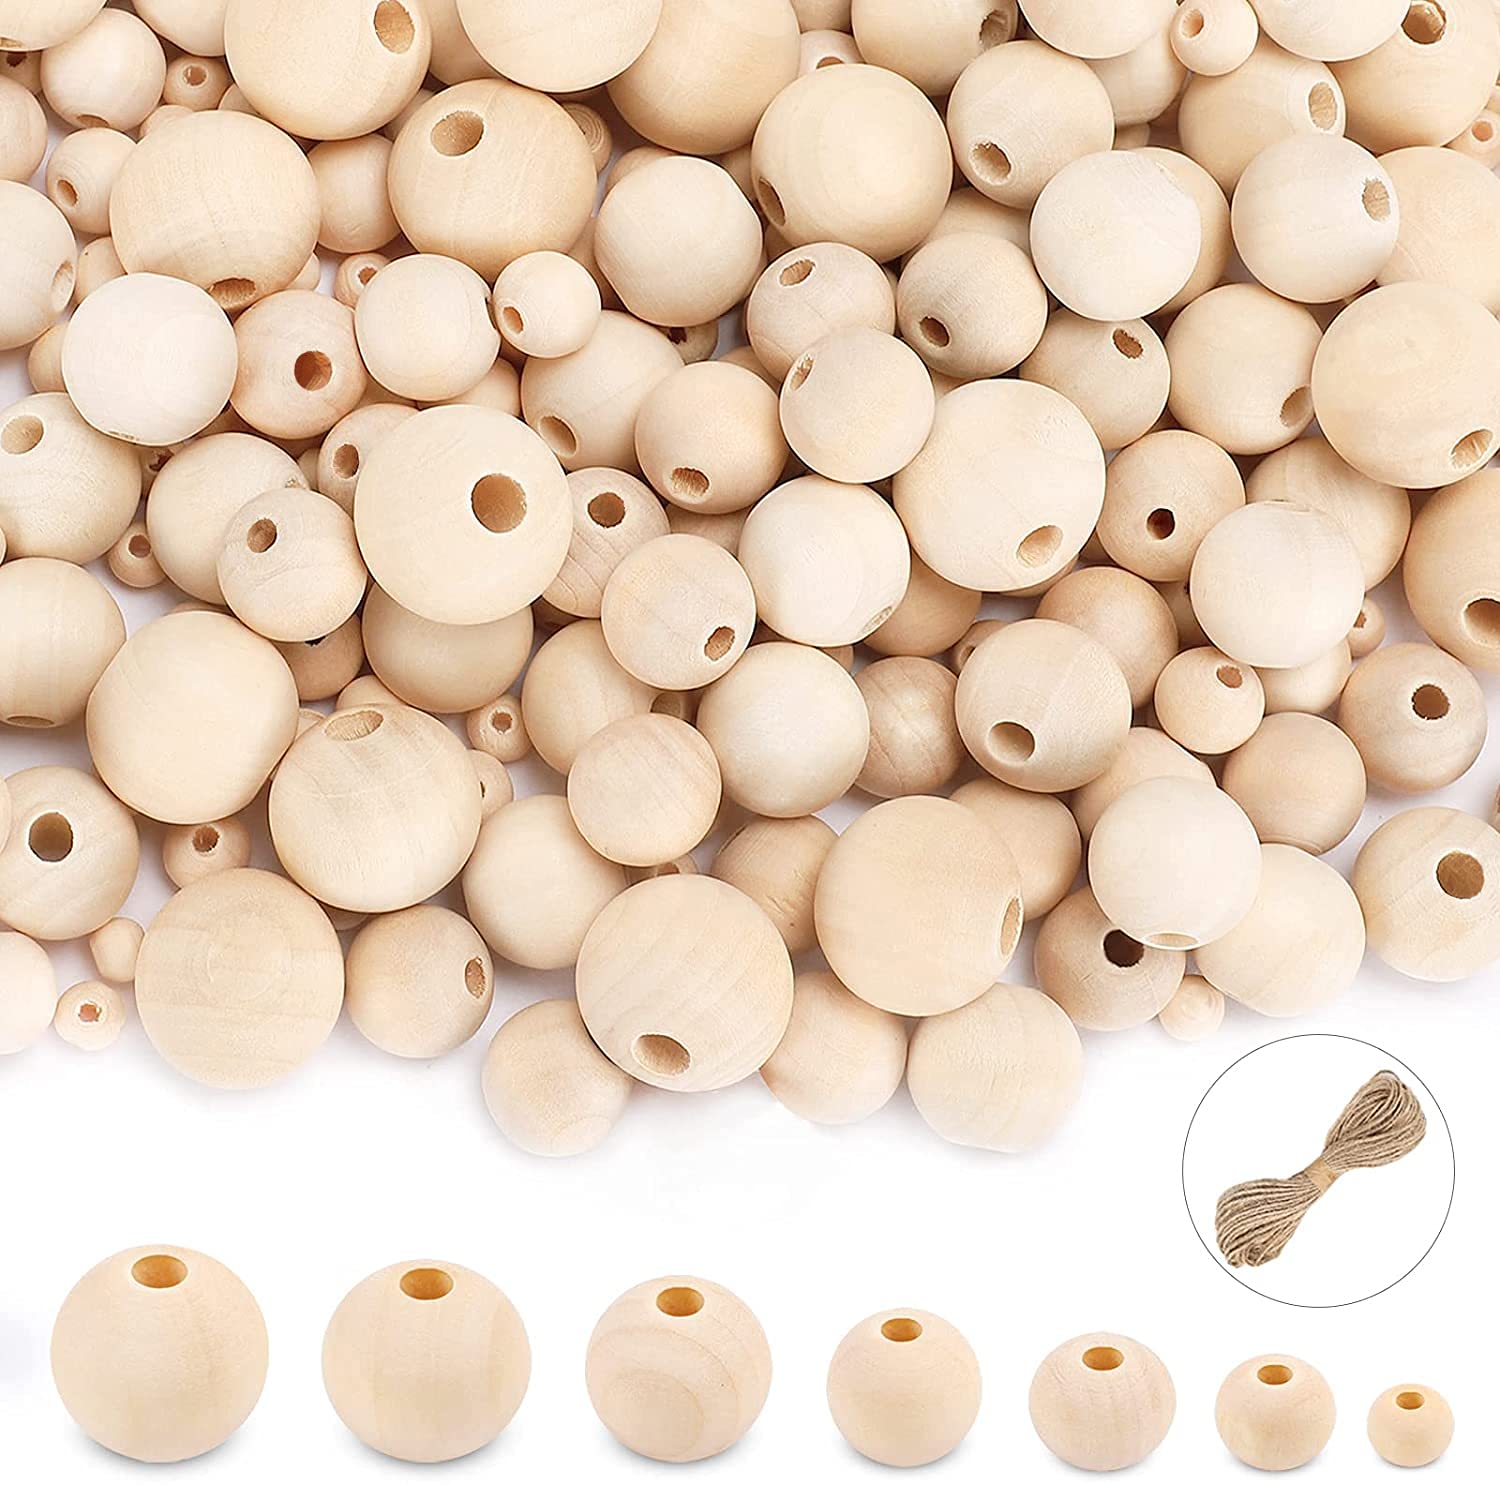 UOONY 800pcs Wooden Beads for Crafts 7 Sizes Unfinished Natural Wood Beads  Wooden Beads Bulk 6mm